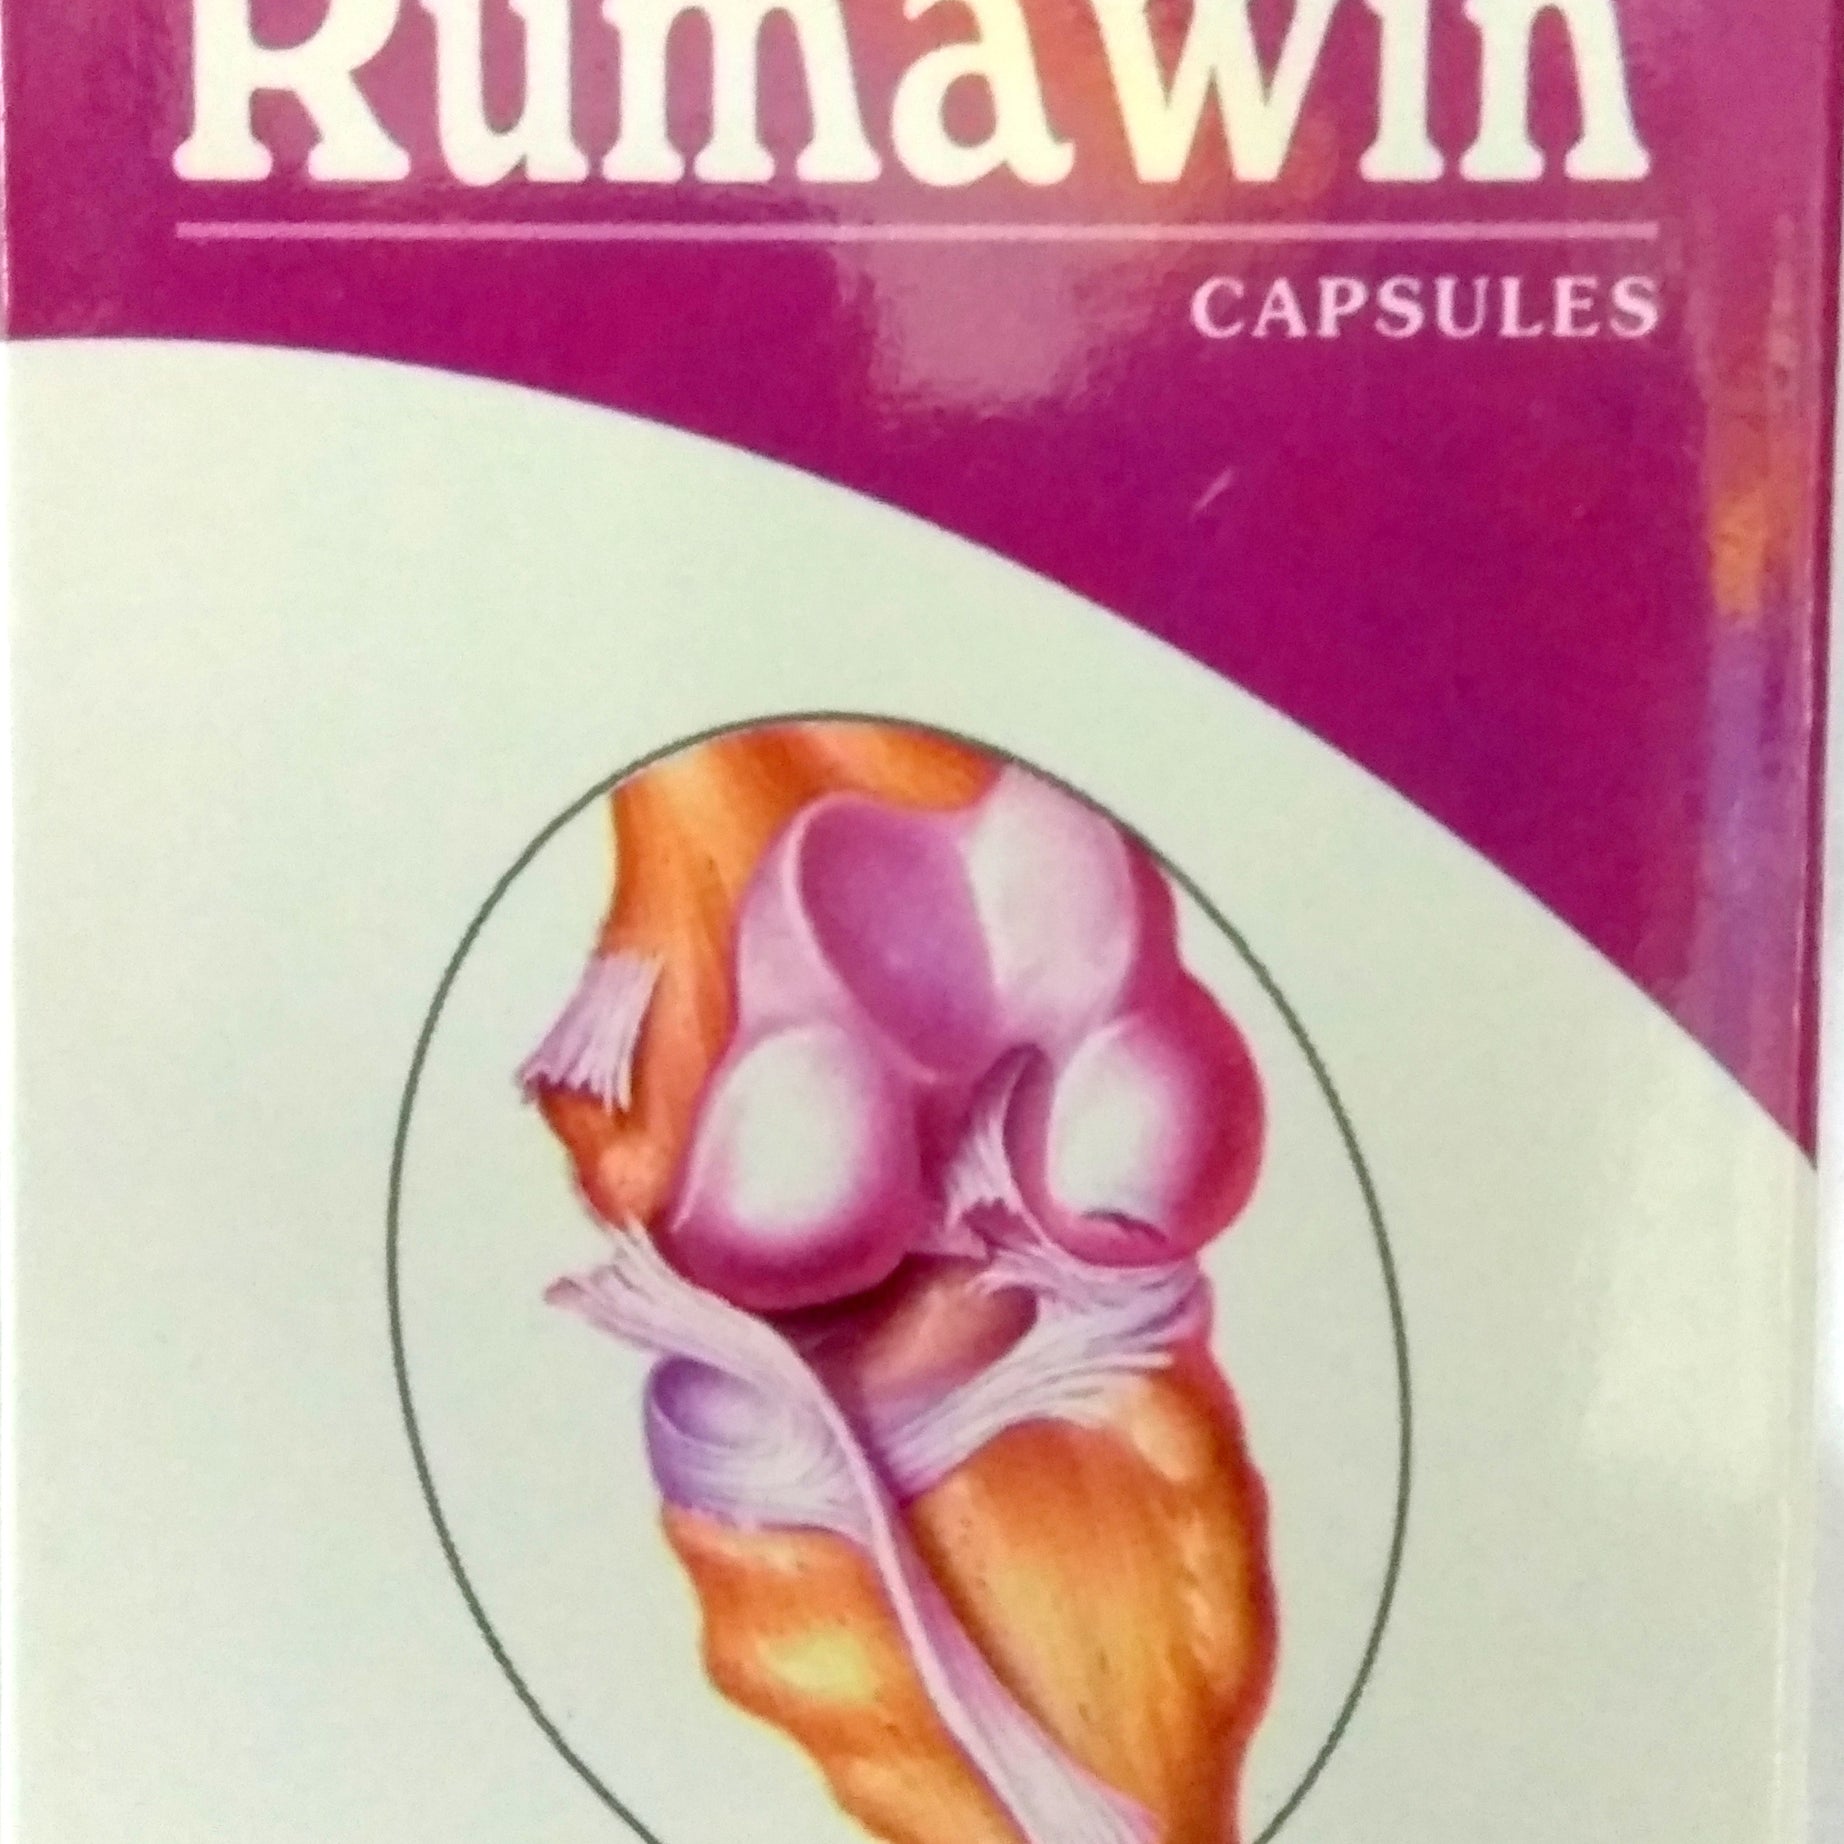 Shop Rumawin 10Capsules at price 70.00 from Wintrust Online - Ayush Care